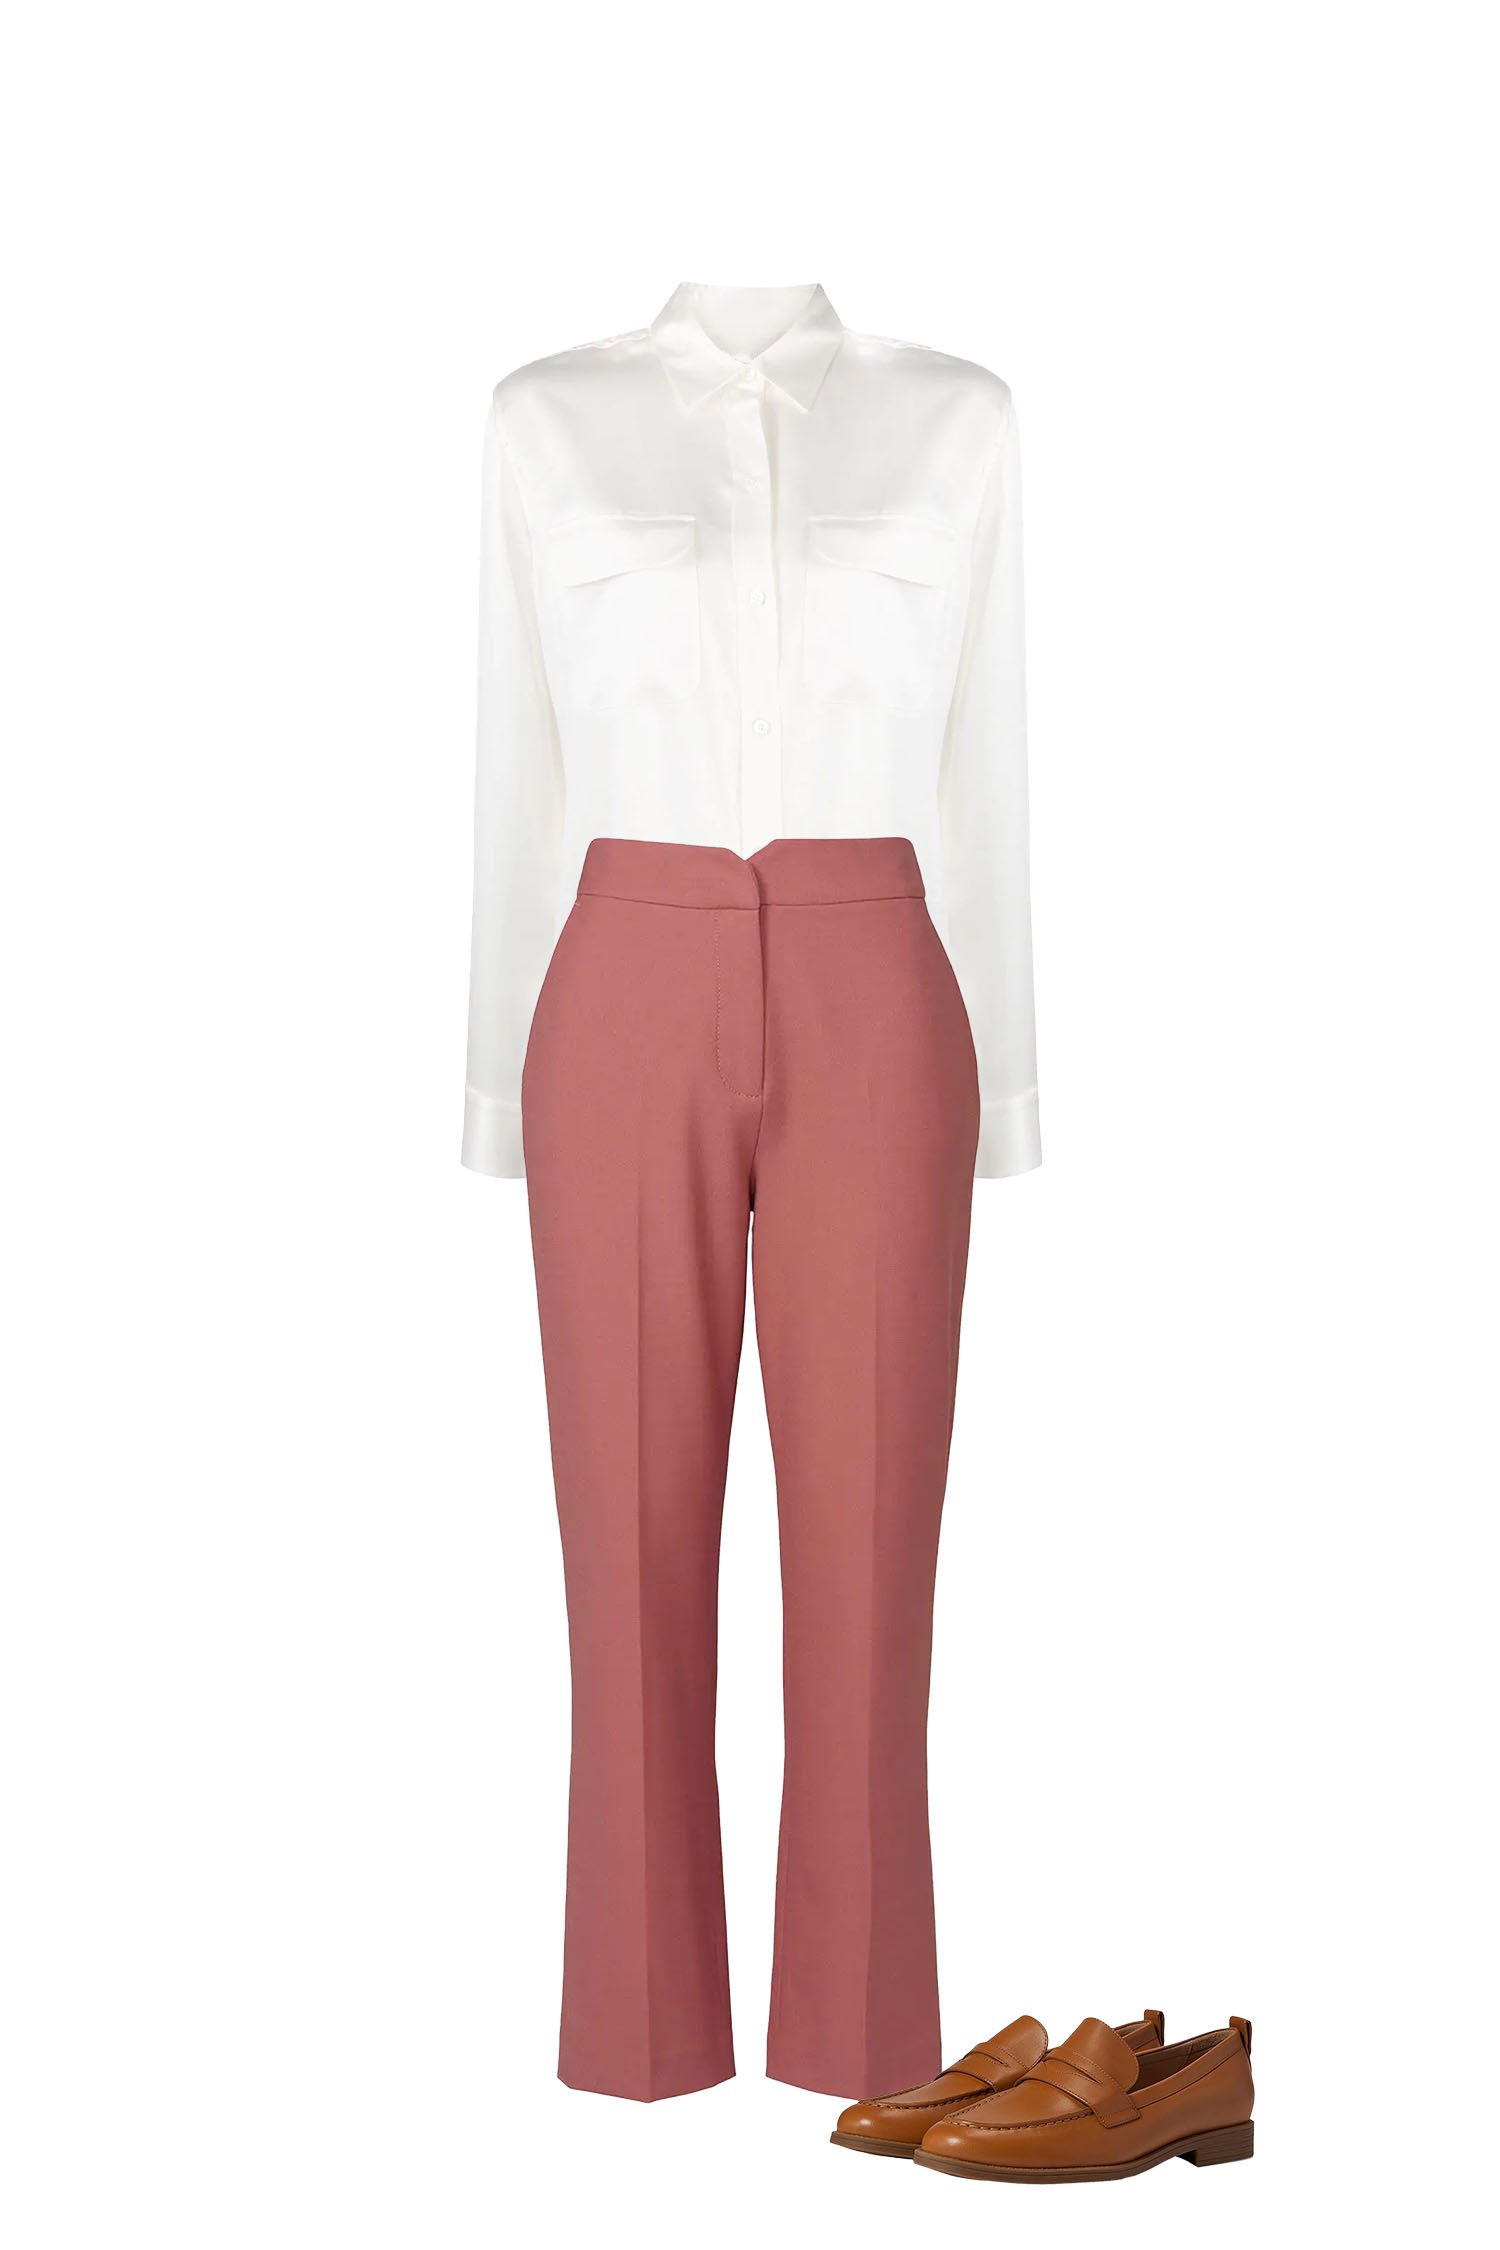 Spring Office Outfit - Rose Pink Ankle Pants, Pink Satin Blouse, Brown Loafers